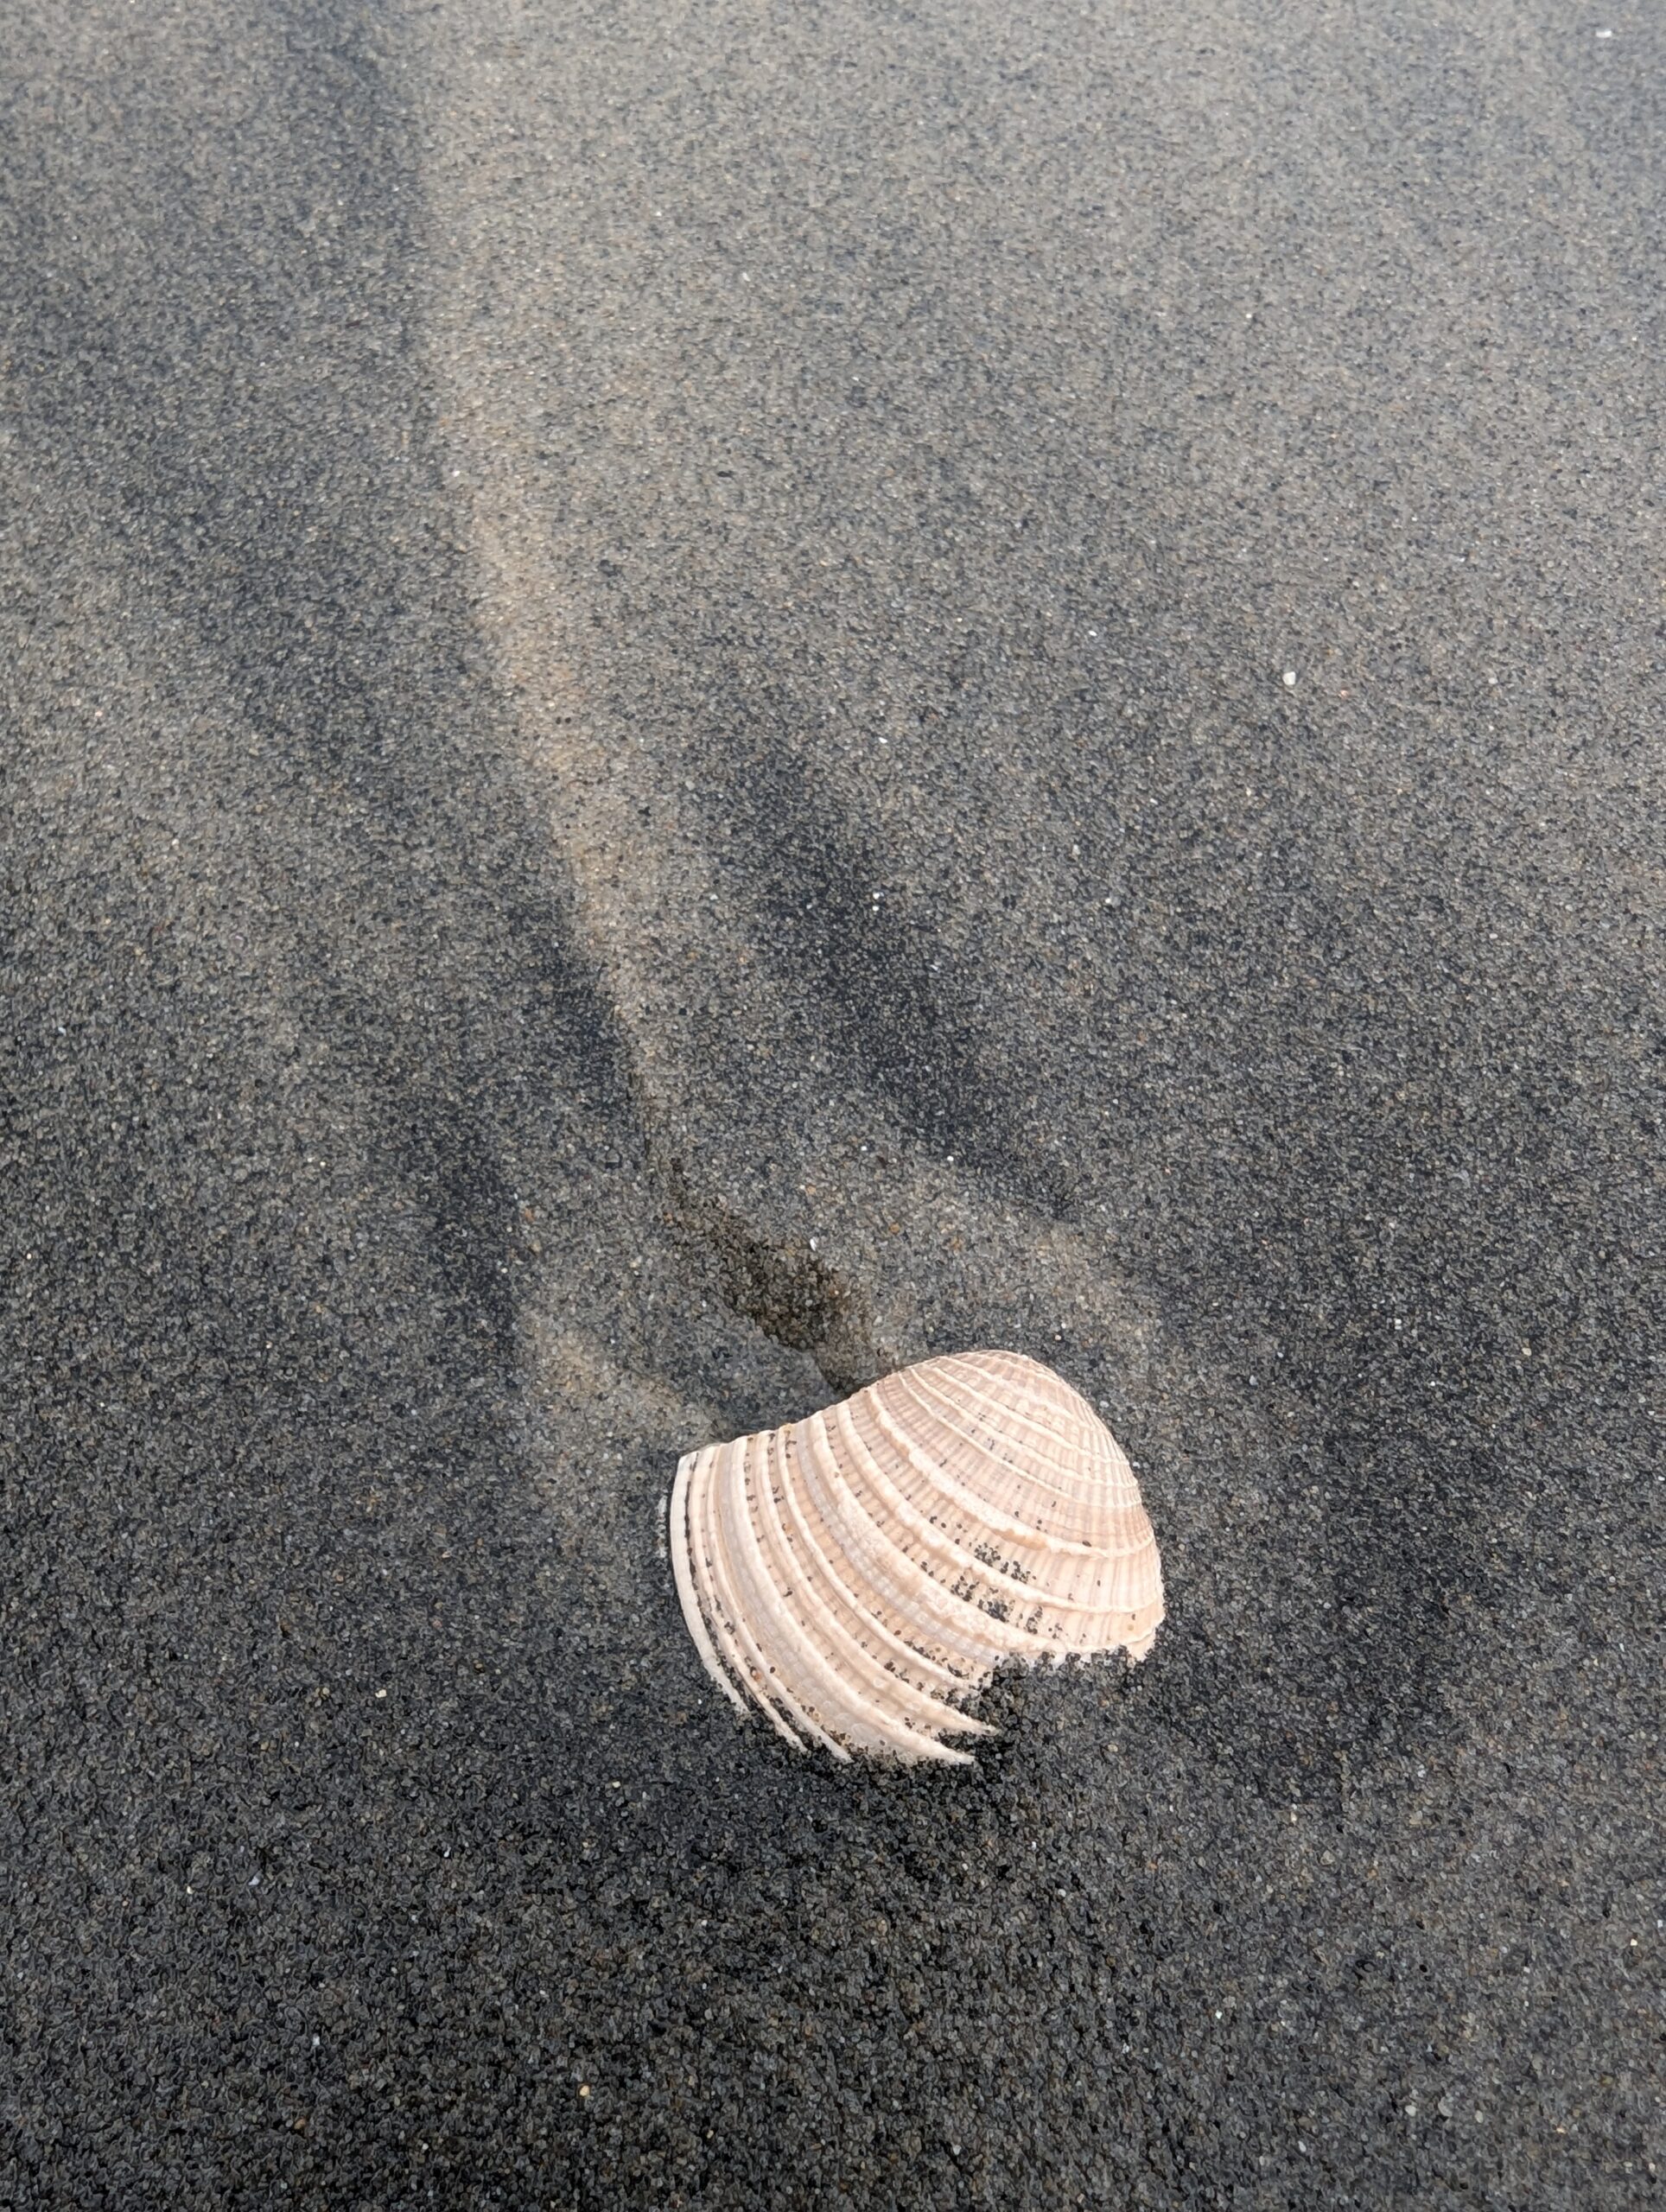 A photo of a scallop shell recently washed up and partially buried under the wet, gray sand.A photo of a scallop shell recently washed up and partially buried under the wet, gray sand.